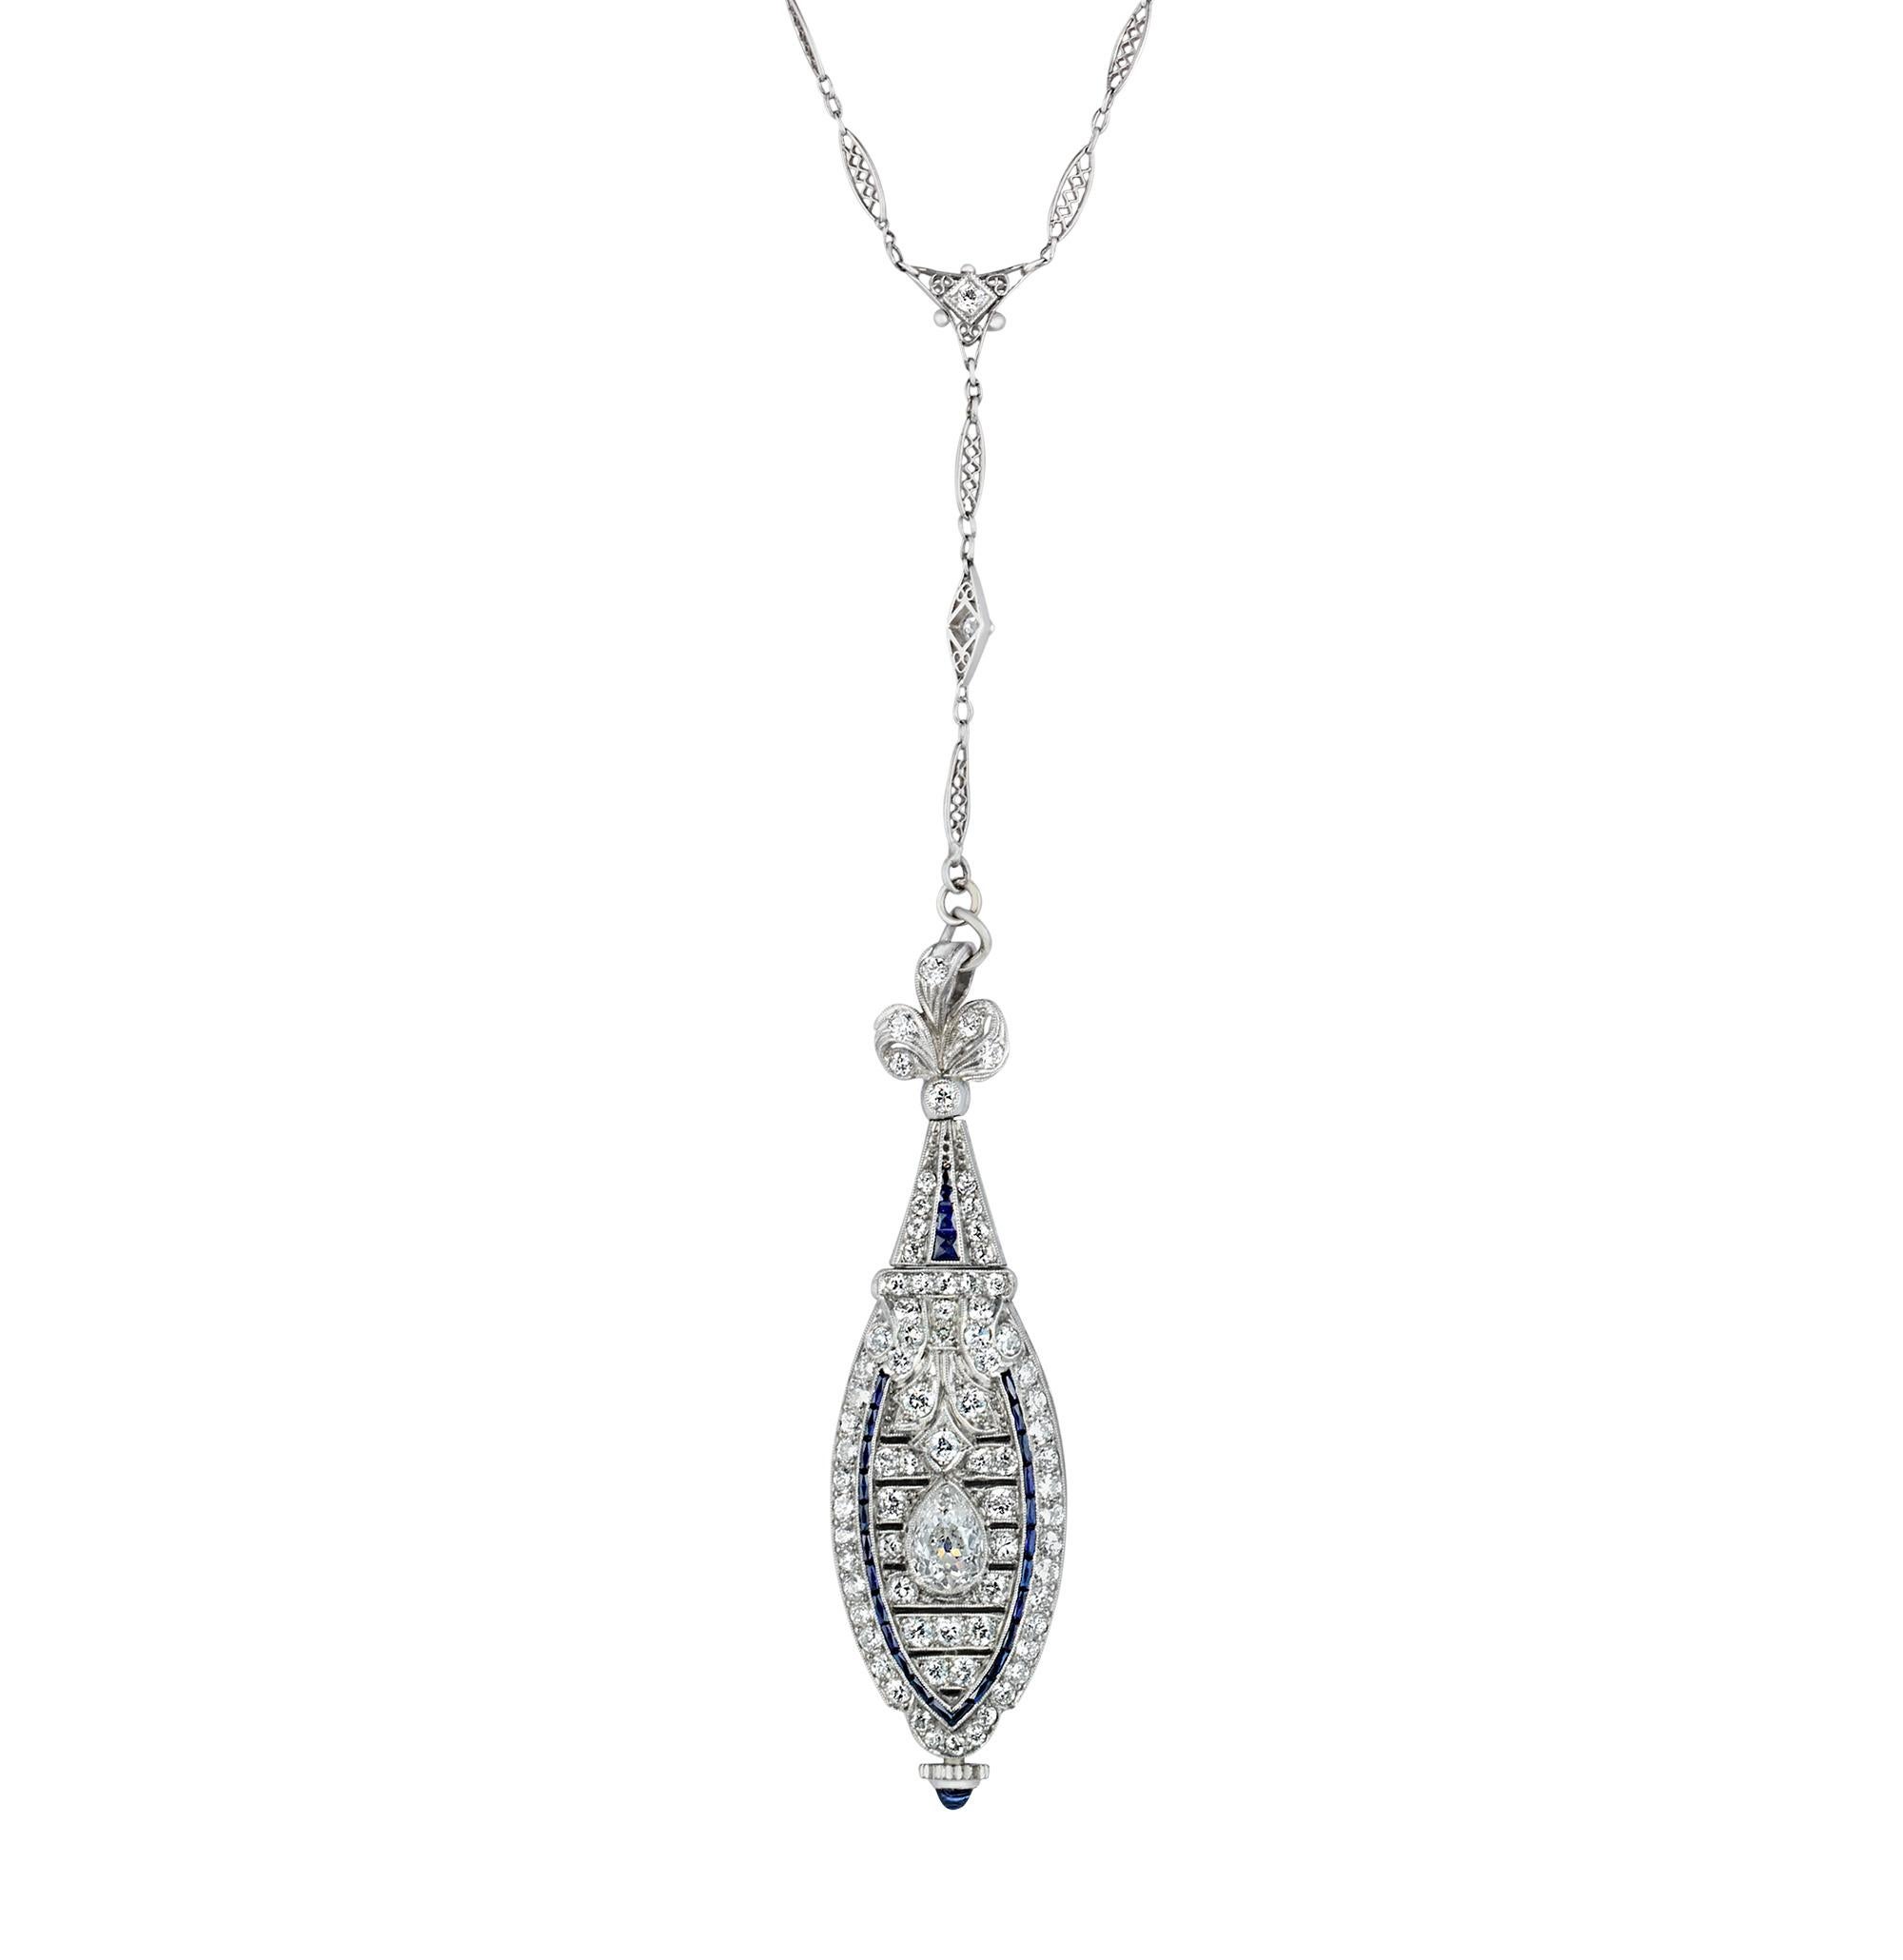 Attached to a handmade Y-shaped chain, this rare French diamond and sapphire-studded platinum watch pendant embodies Art Deco charm and sophistication. The elegant timepiece contains 4.50 total carats of diamonds and 0.75 carat of sapphires. The